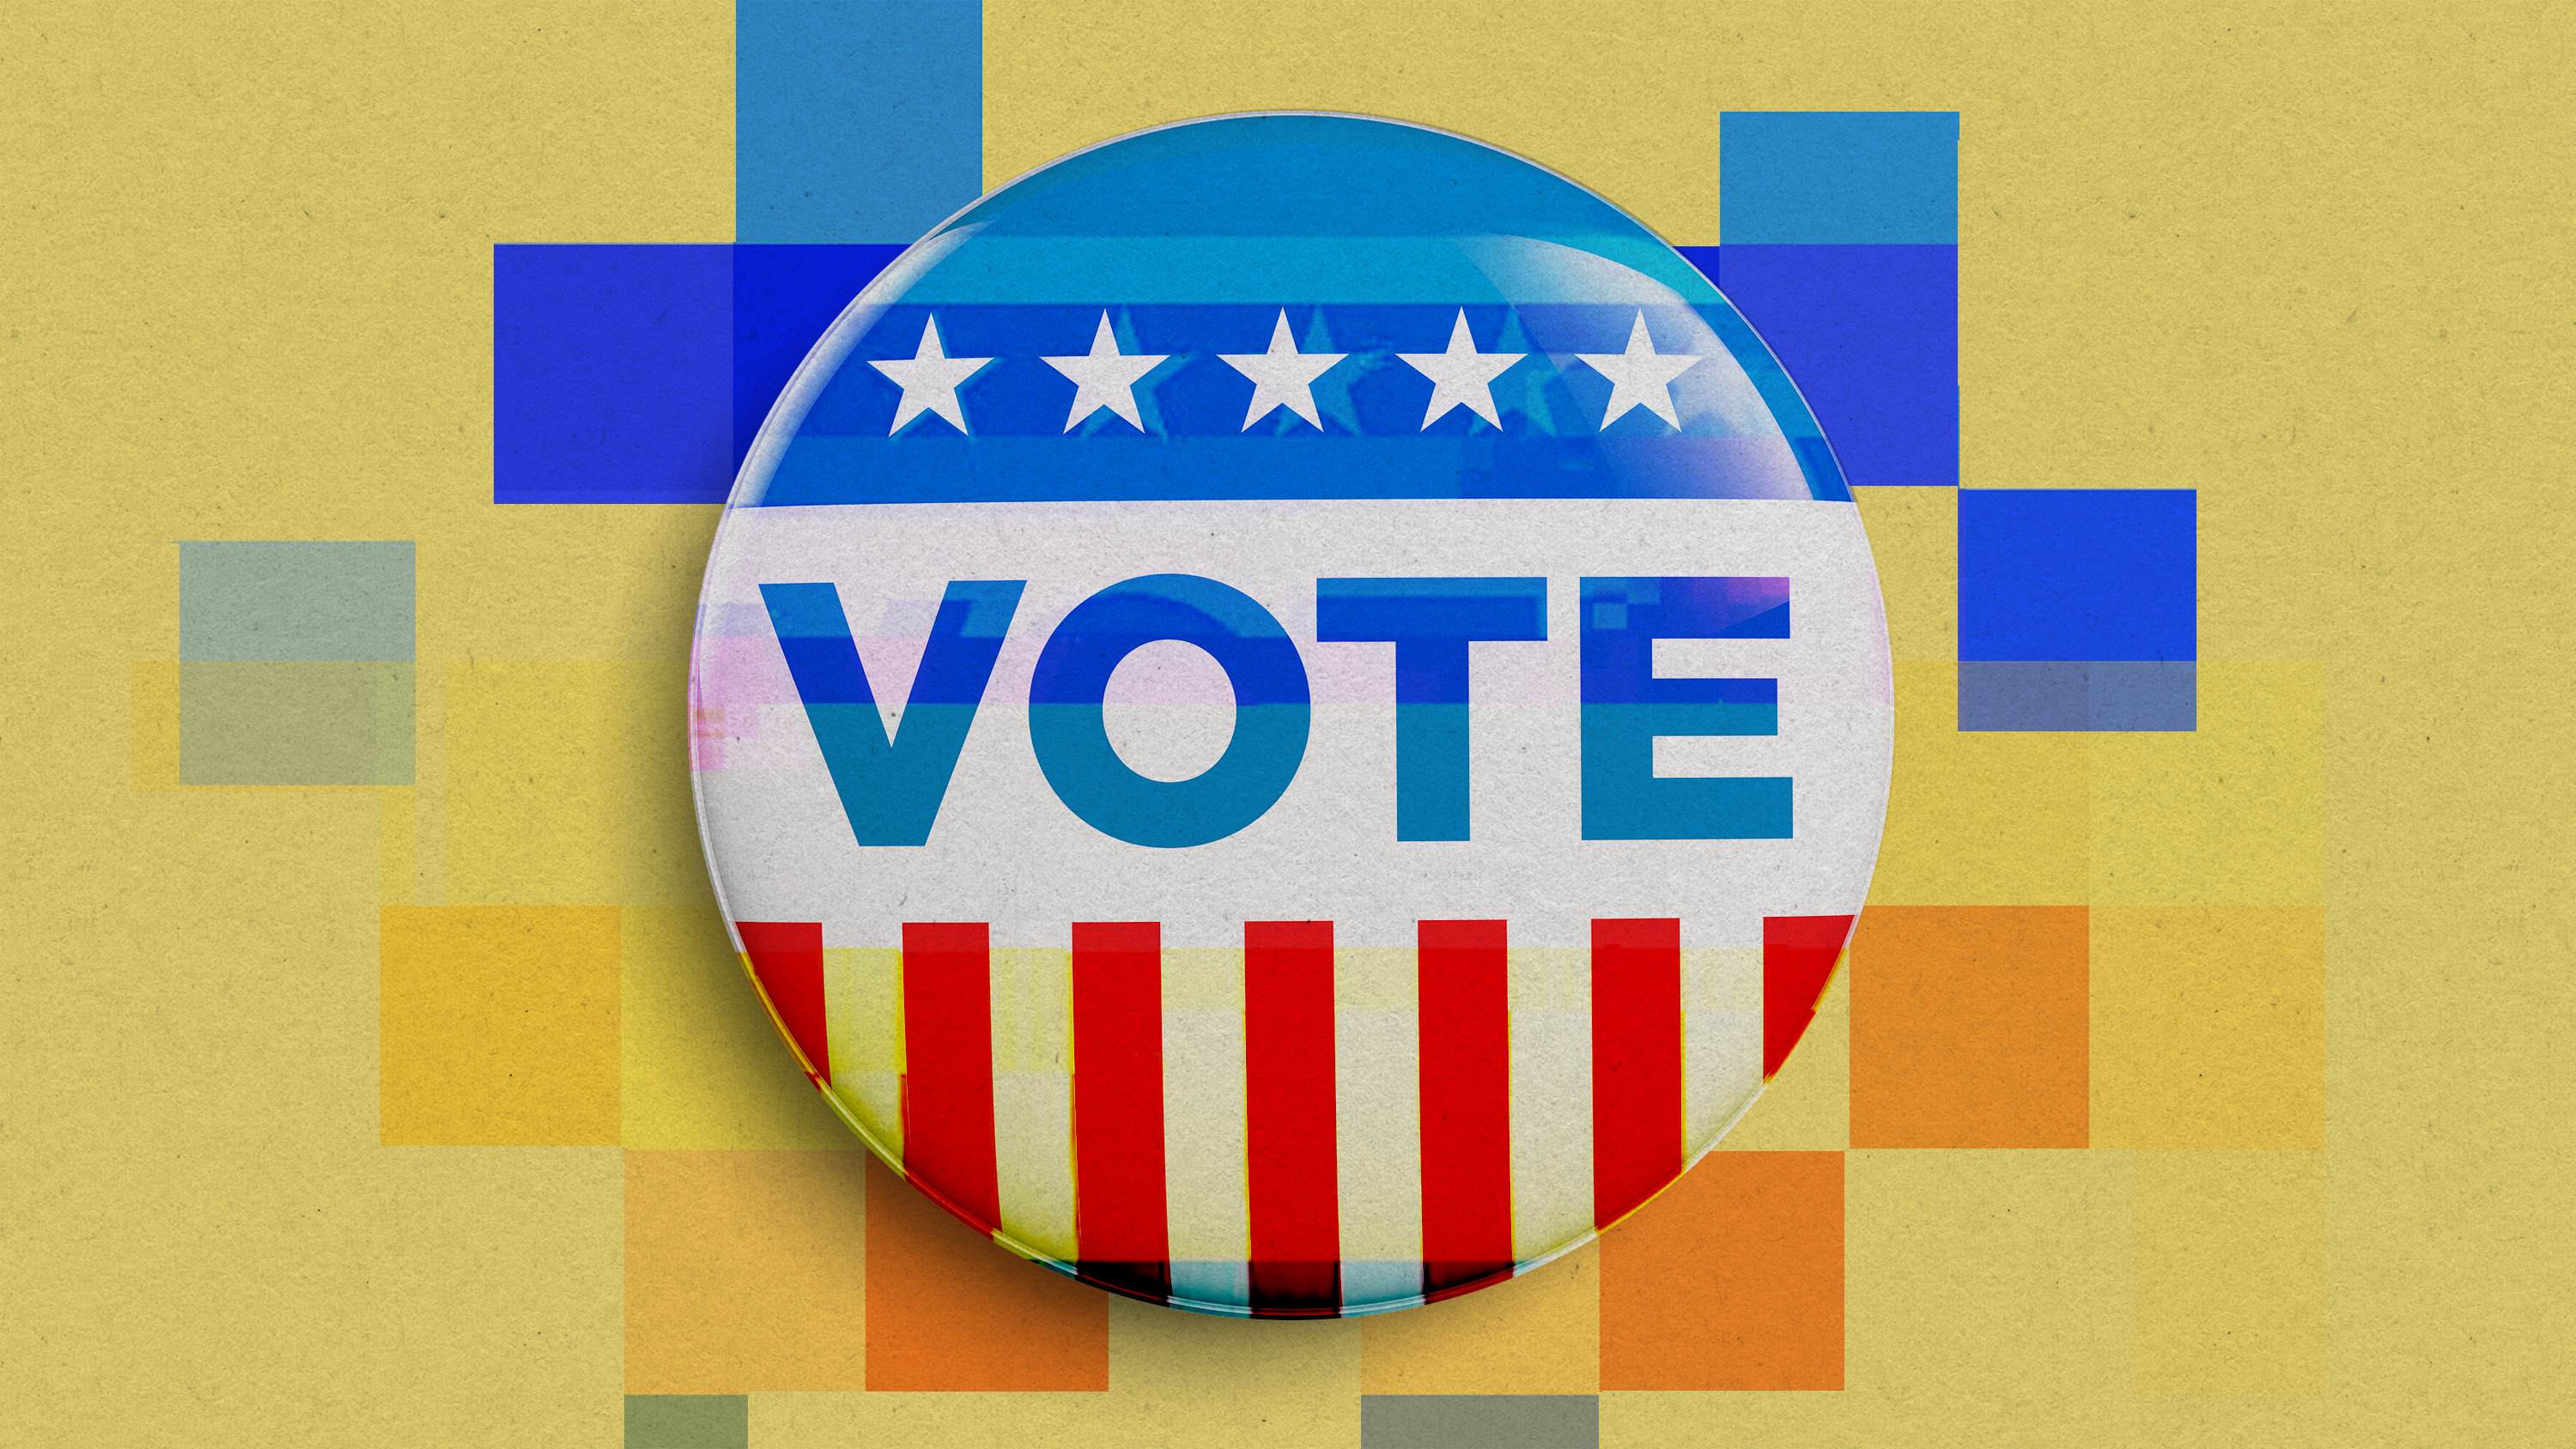 A red, white and blue &quot;Vote&quot; campaign button, with a glitching effect.